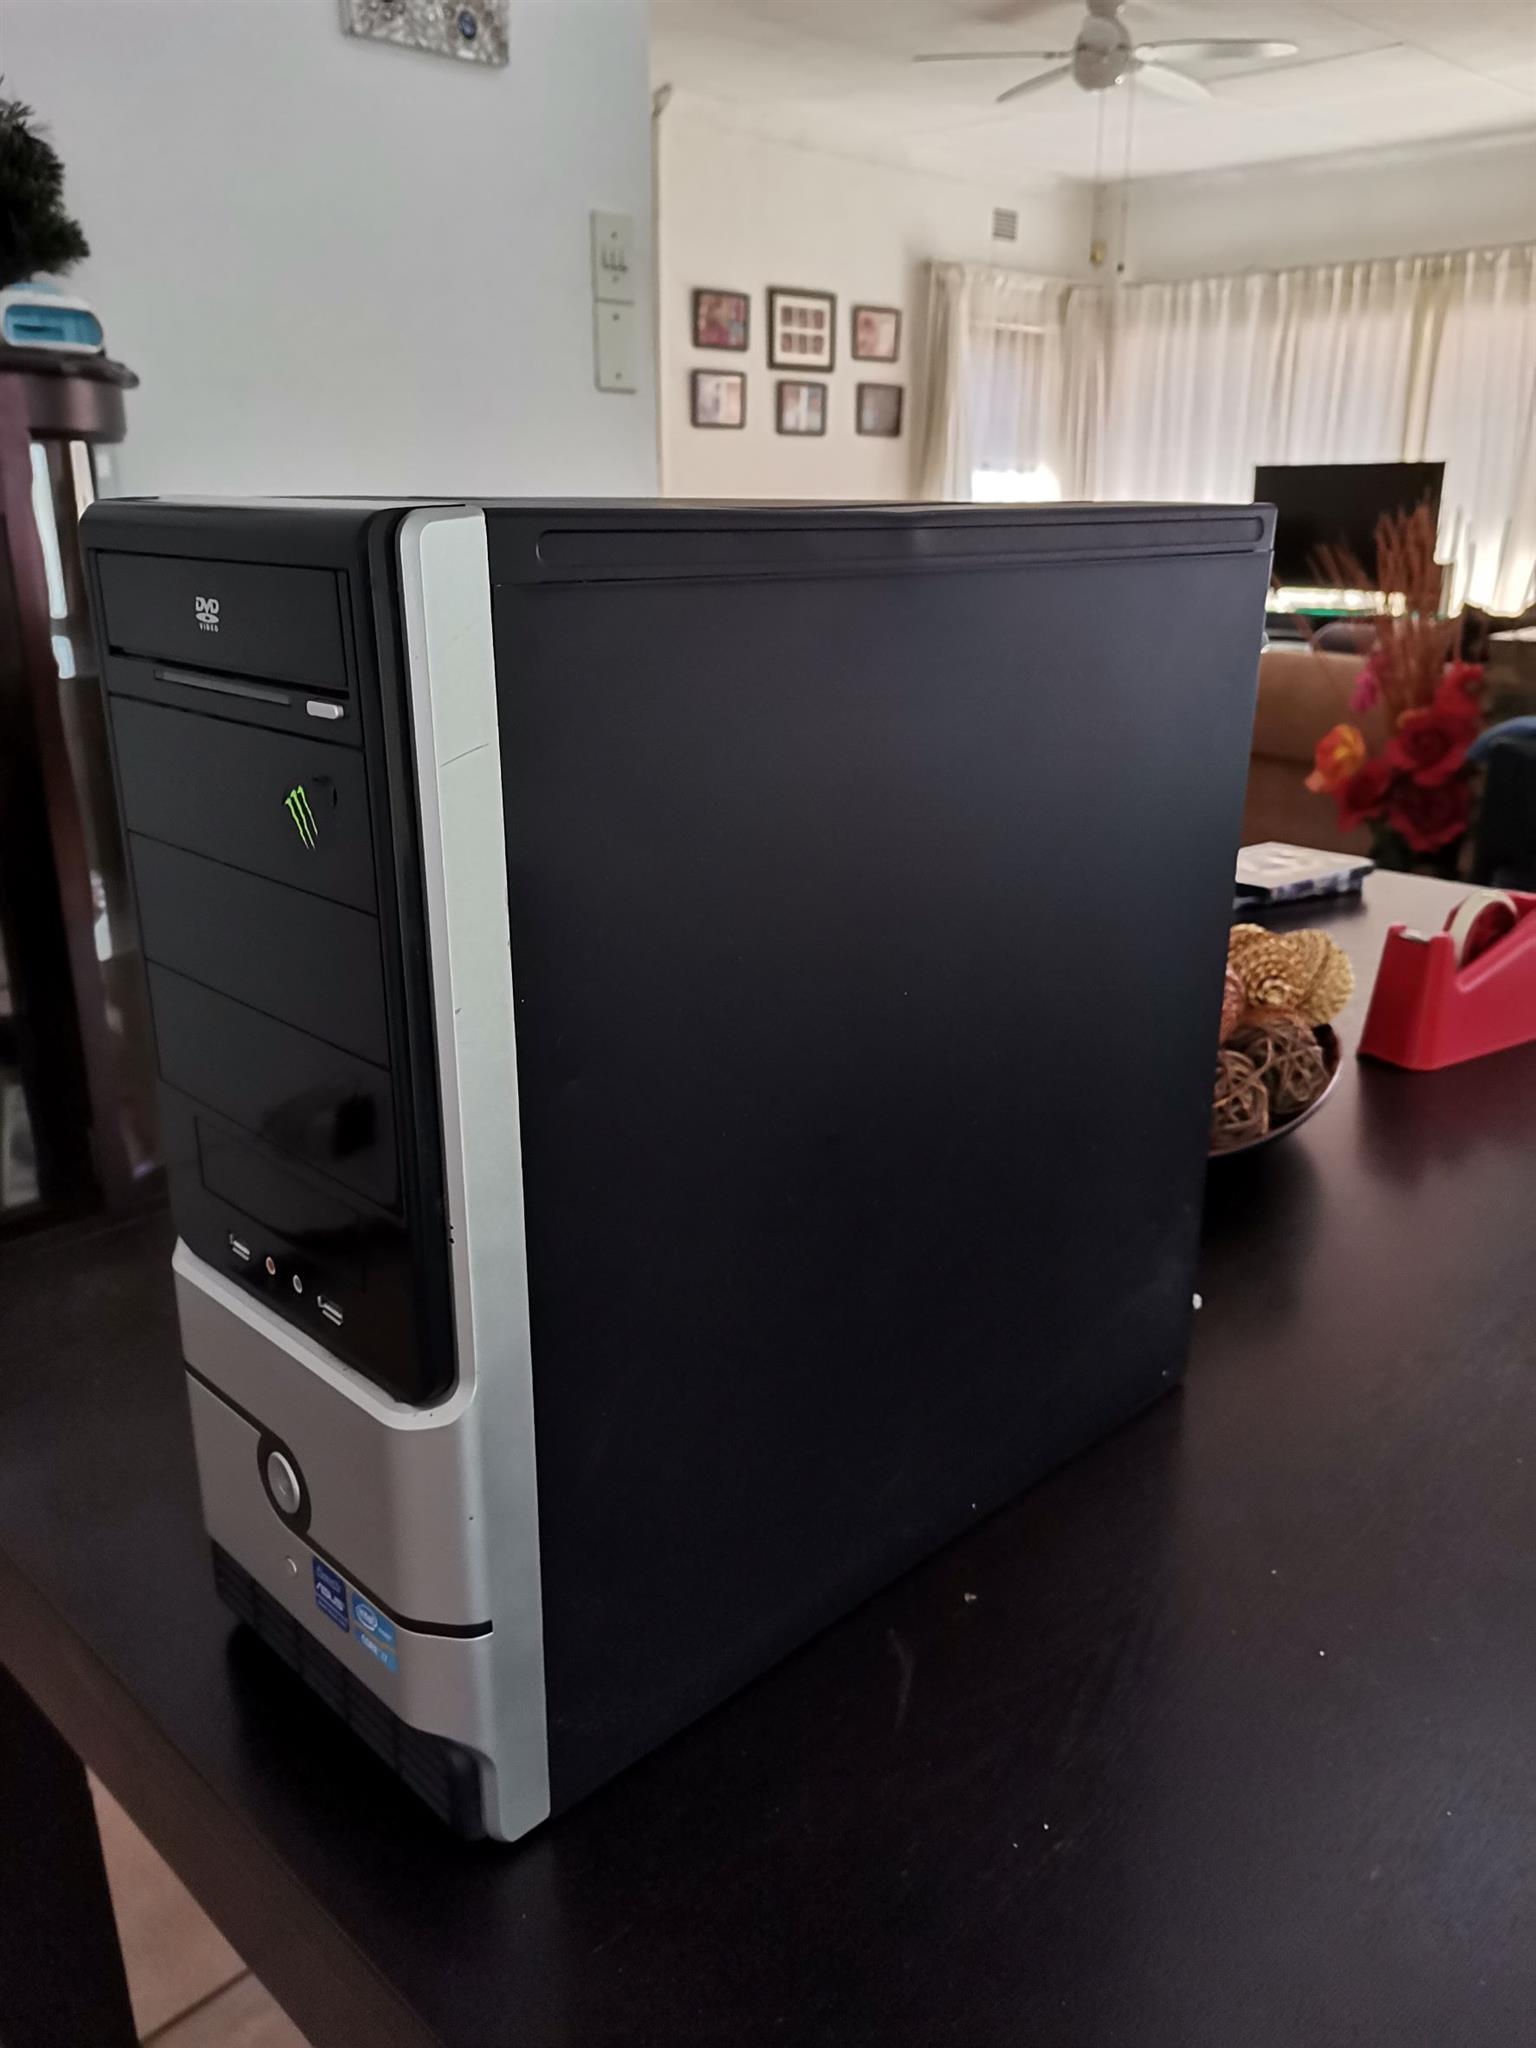 Computer for sale